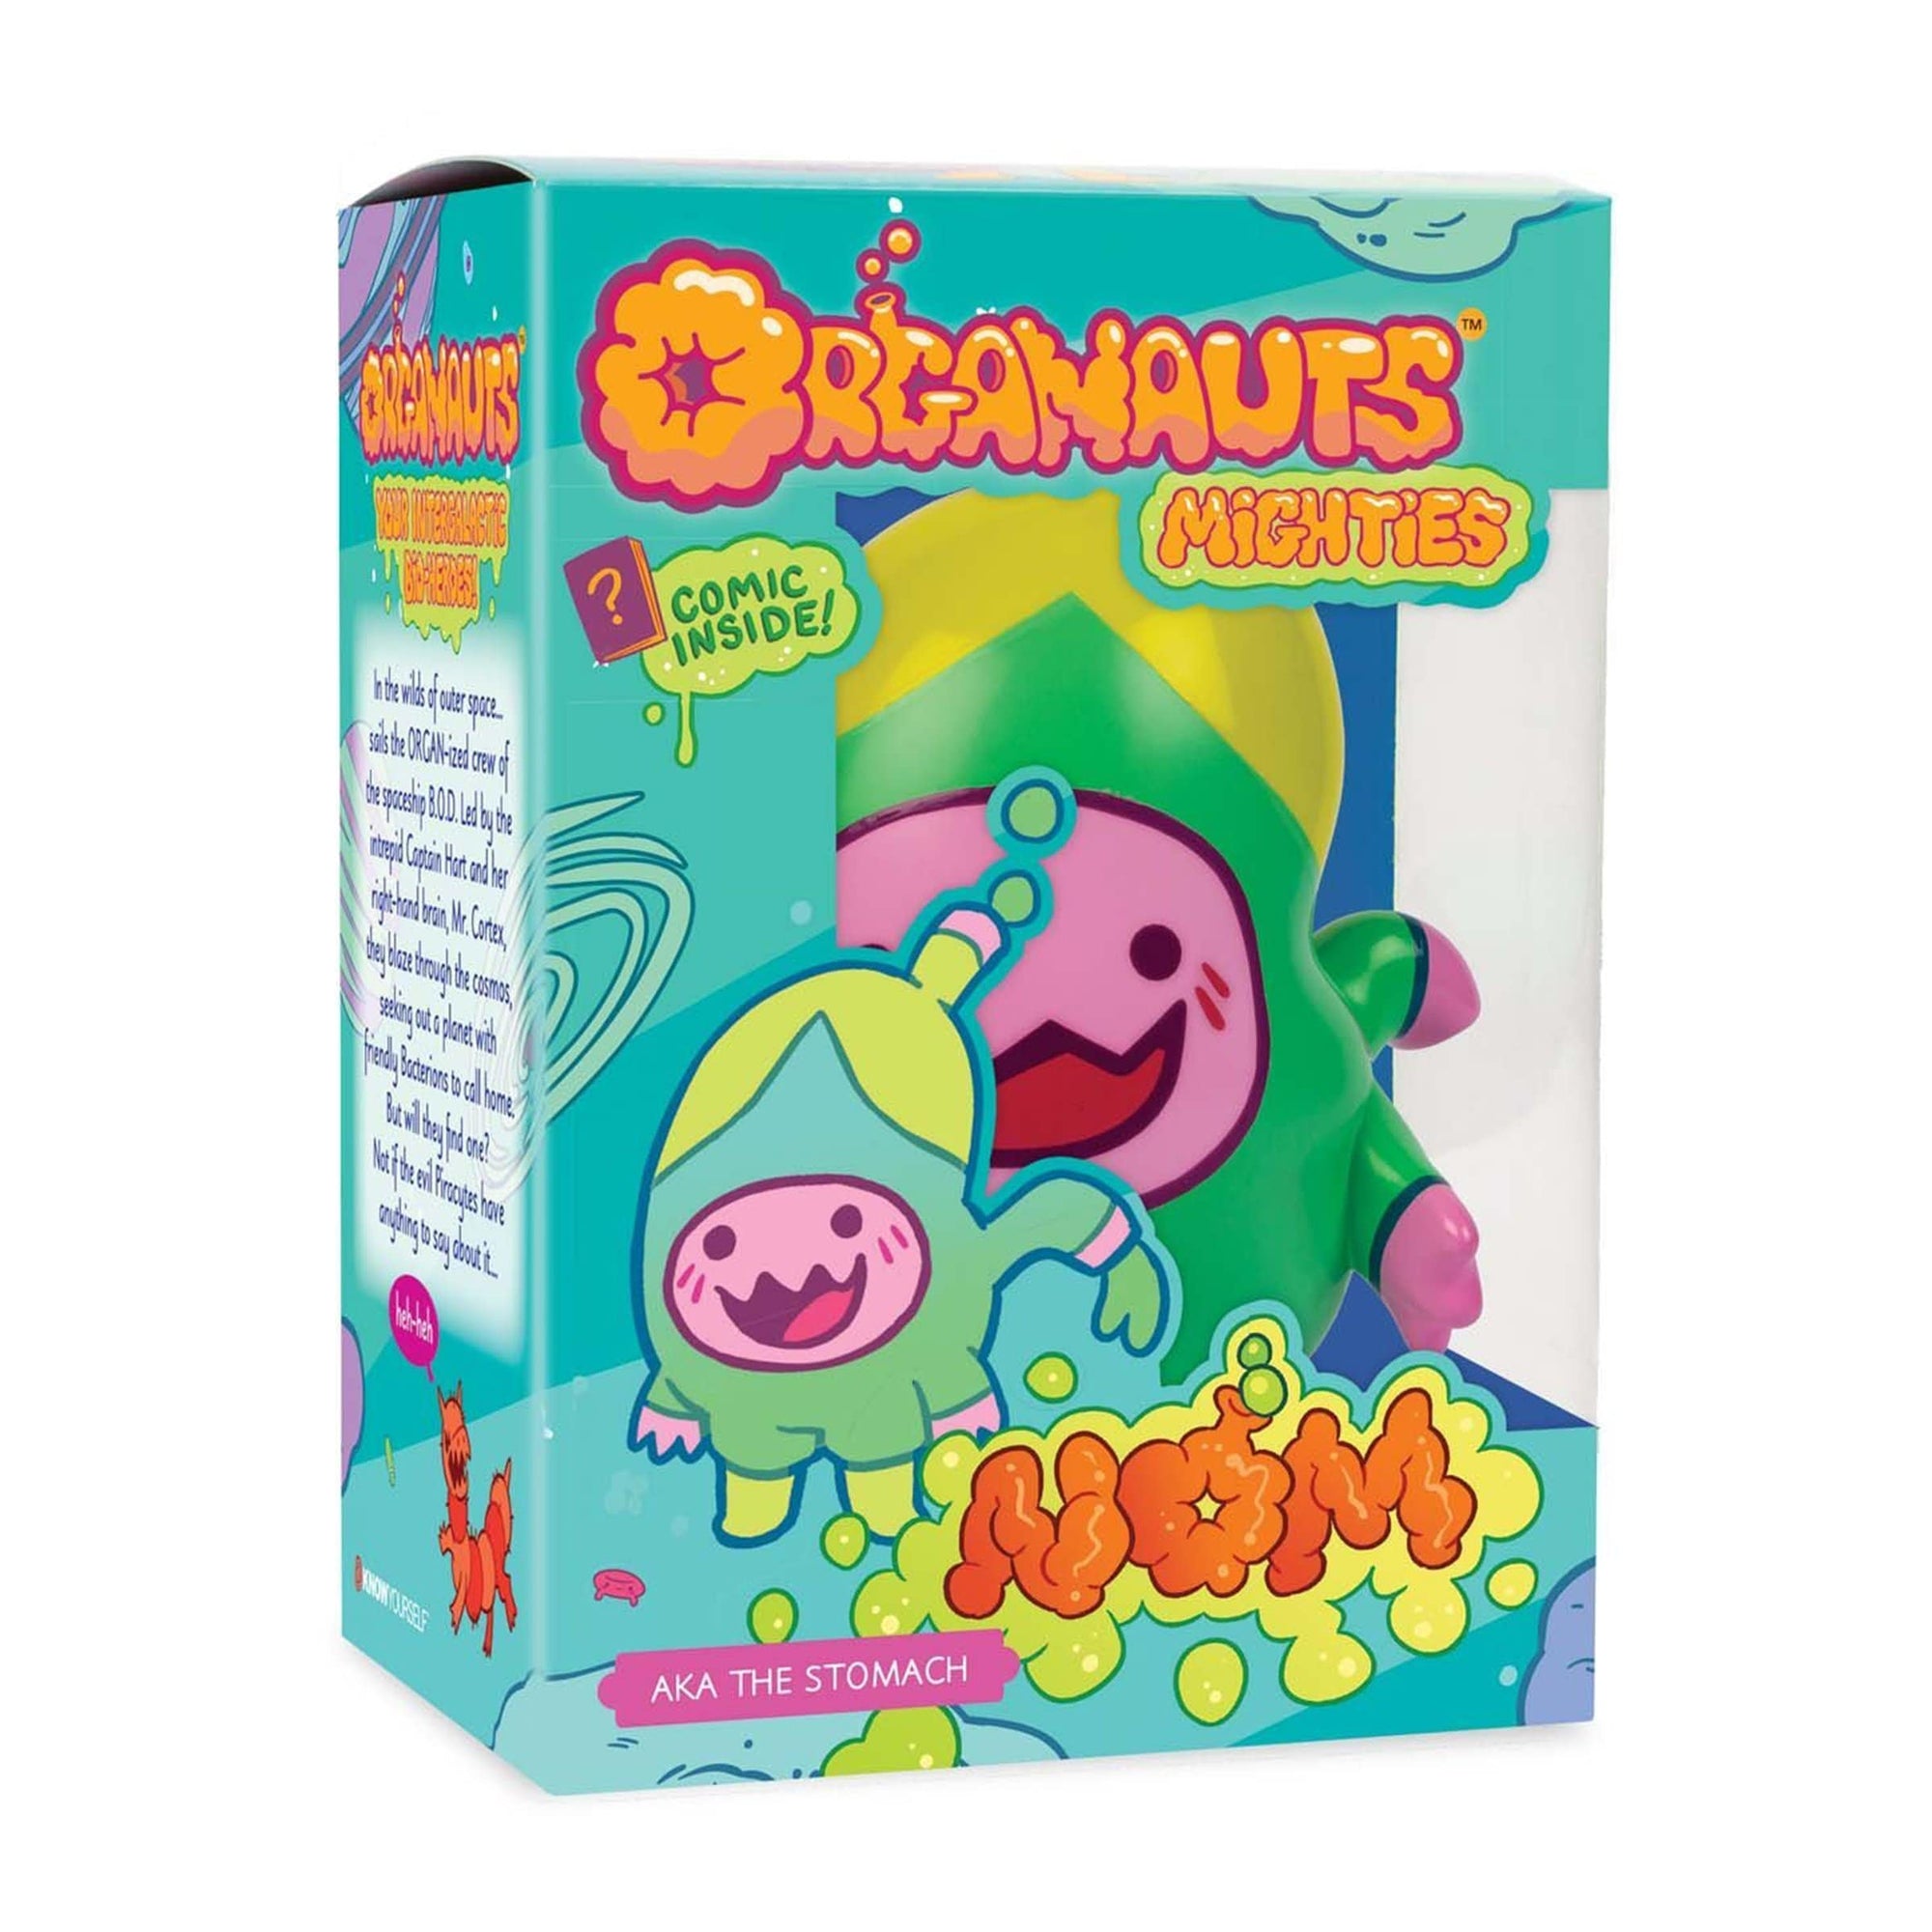 Nom - The Stomach - Organ Learning Toy Health Education for Children